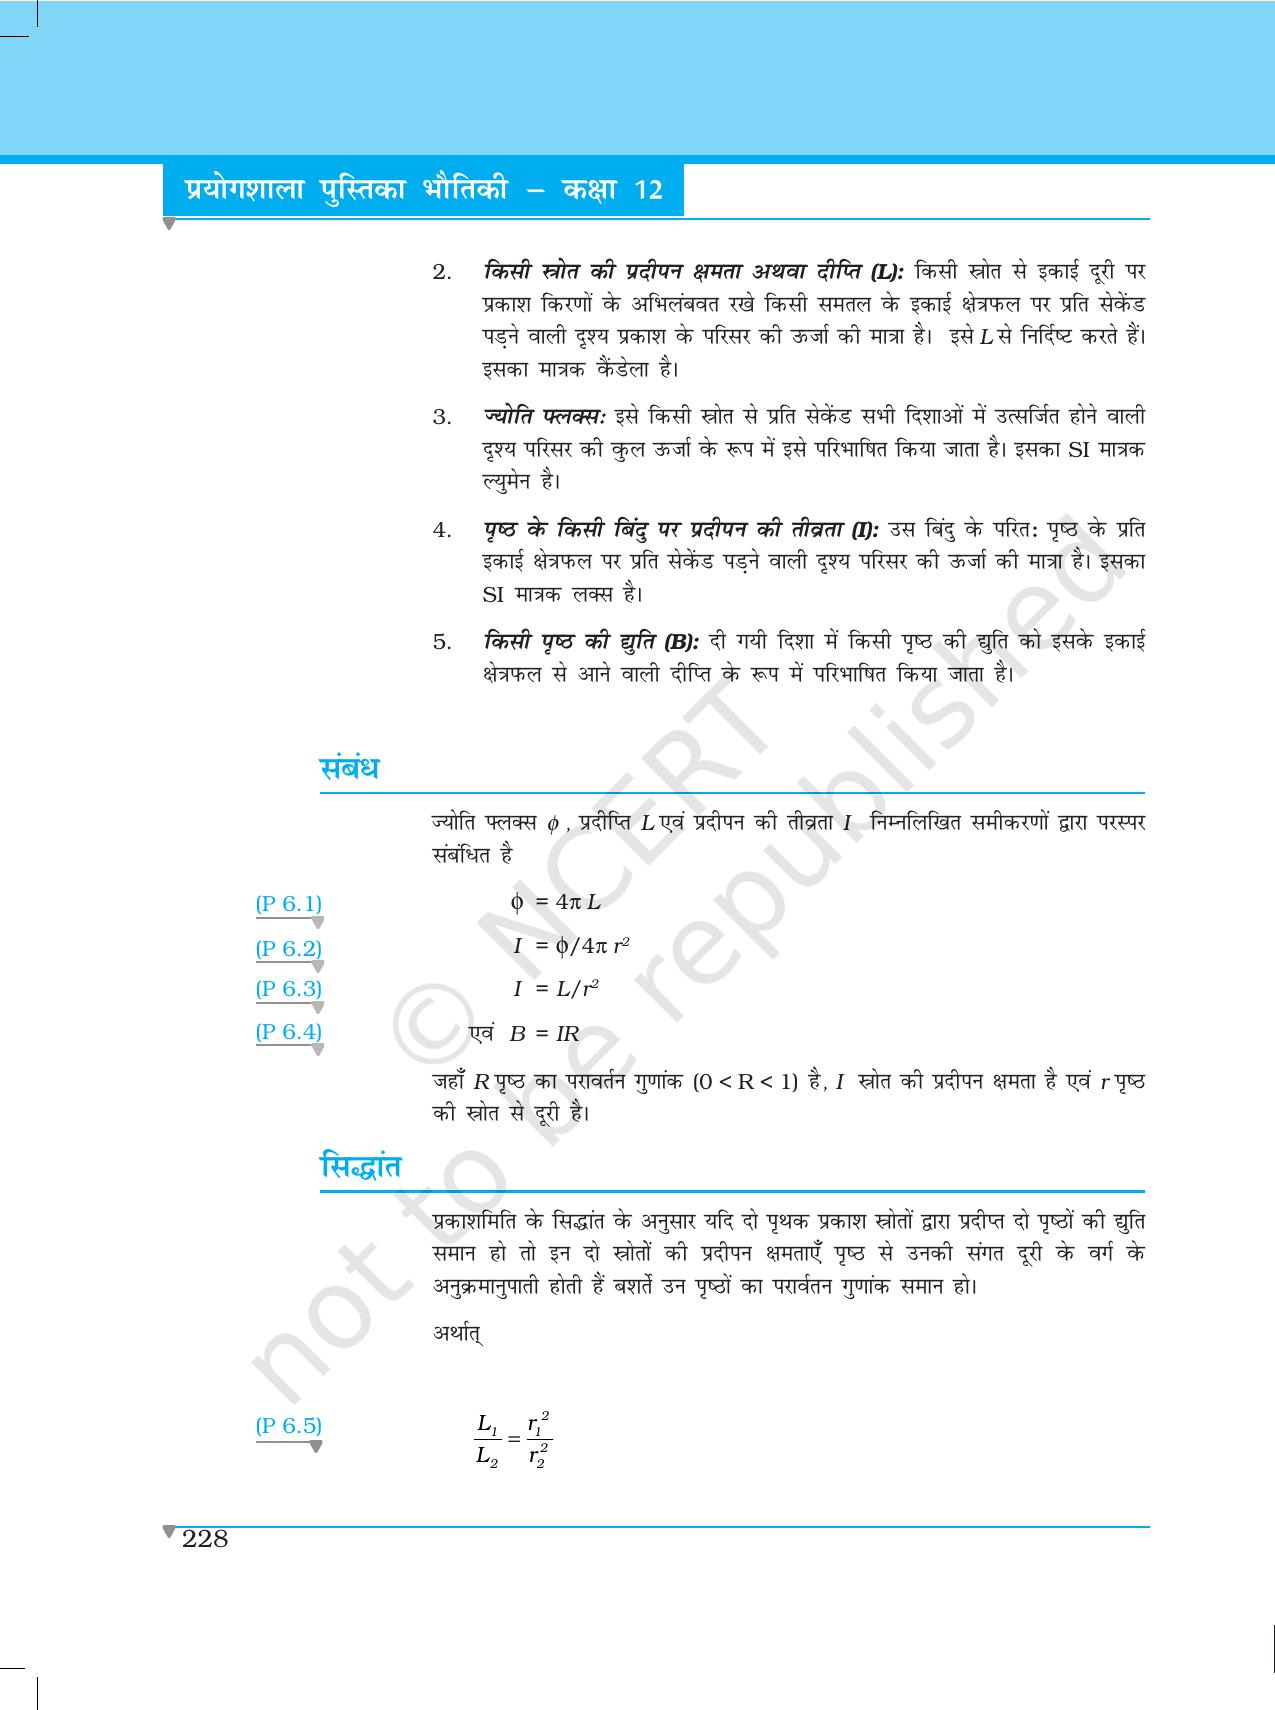 NCERT Laboratory Manuals for Class XII भौतिकी - परियोजना (1 - 7) - Page 22